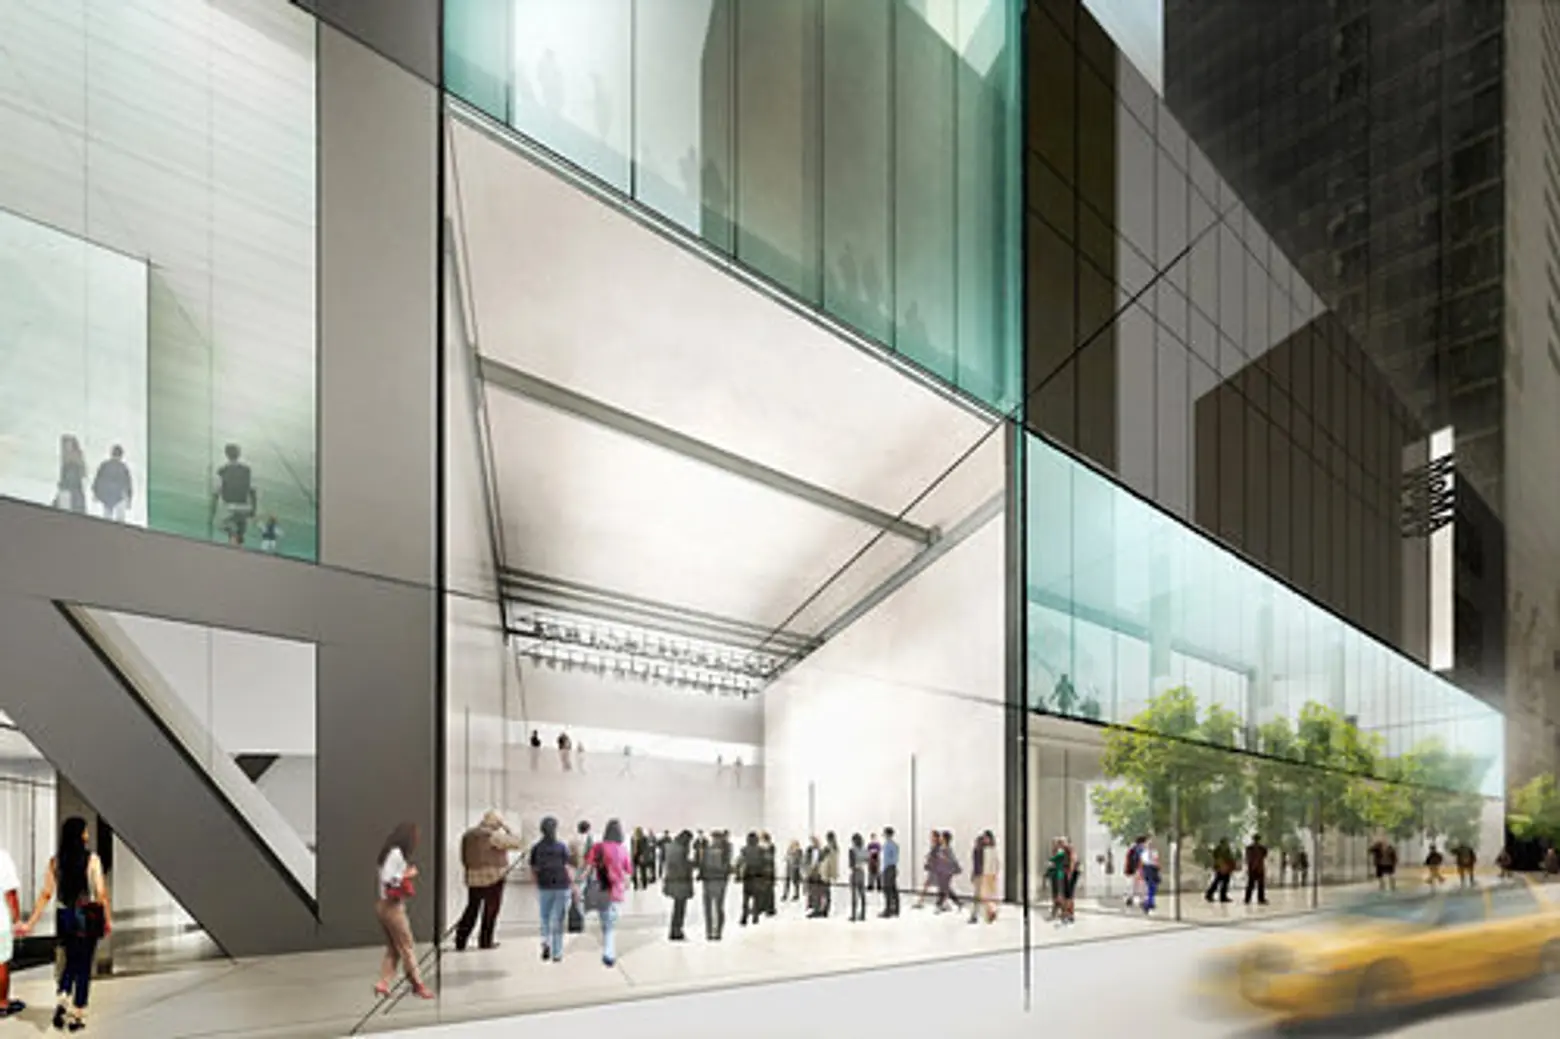 MoMA Files Plans for American Folk Art Museum Expansion; Fifth Avenue Has the Highest Retail Rents in the World